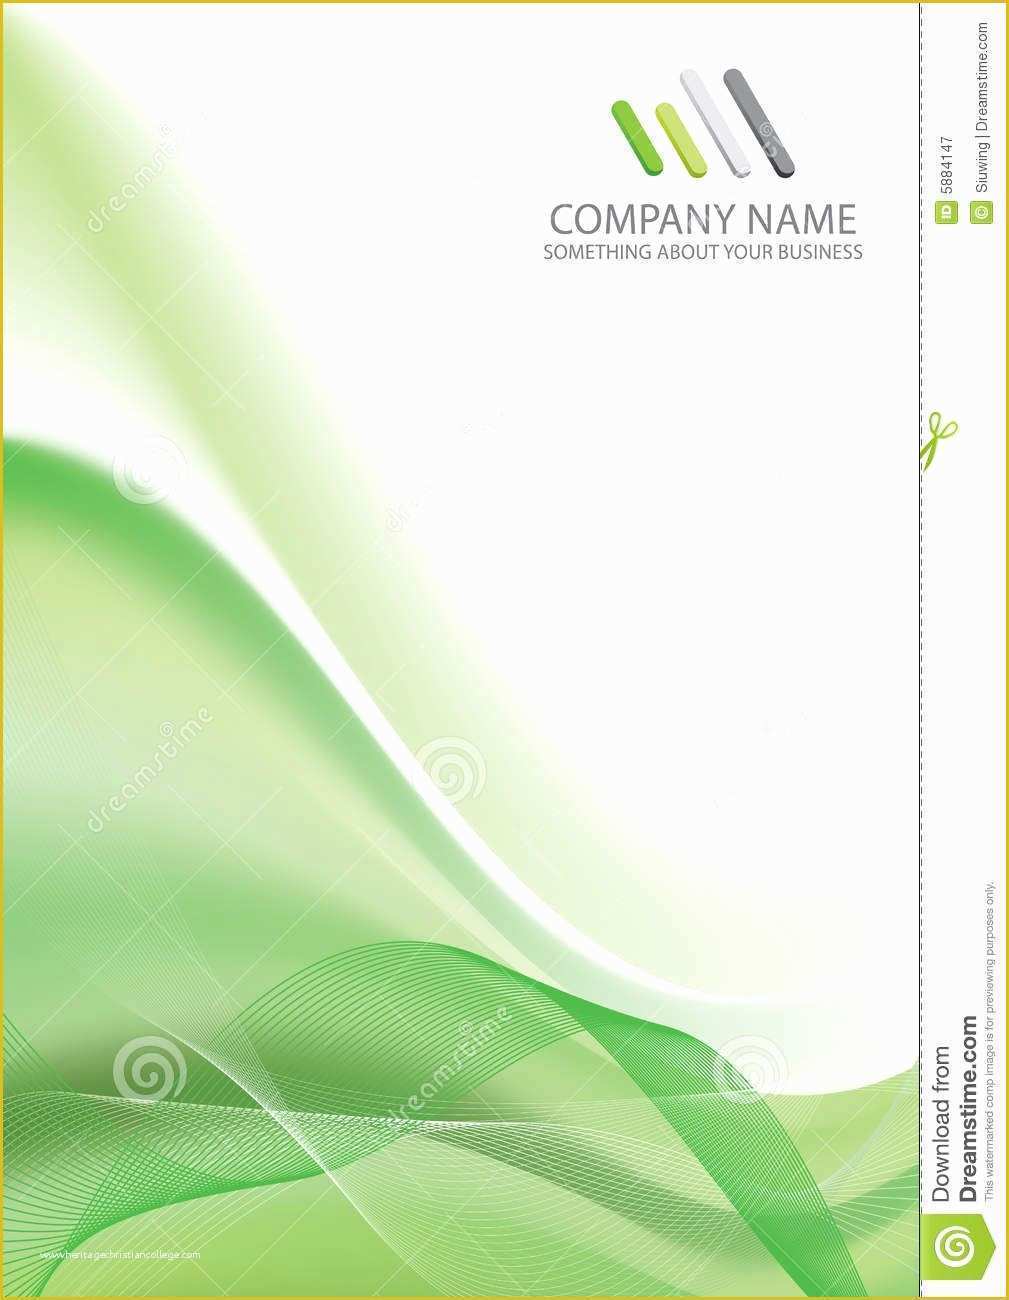 report cover page template microsoft word free download